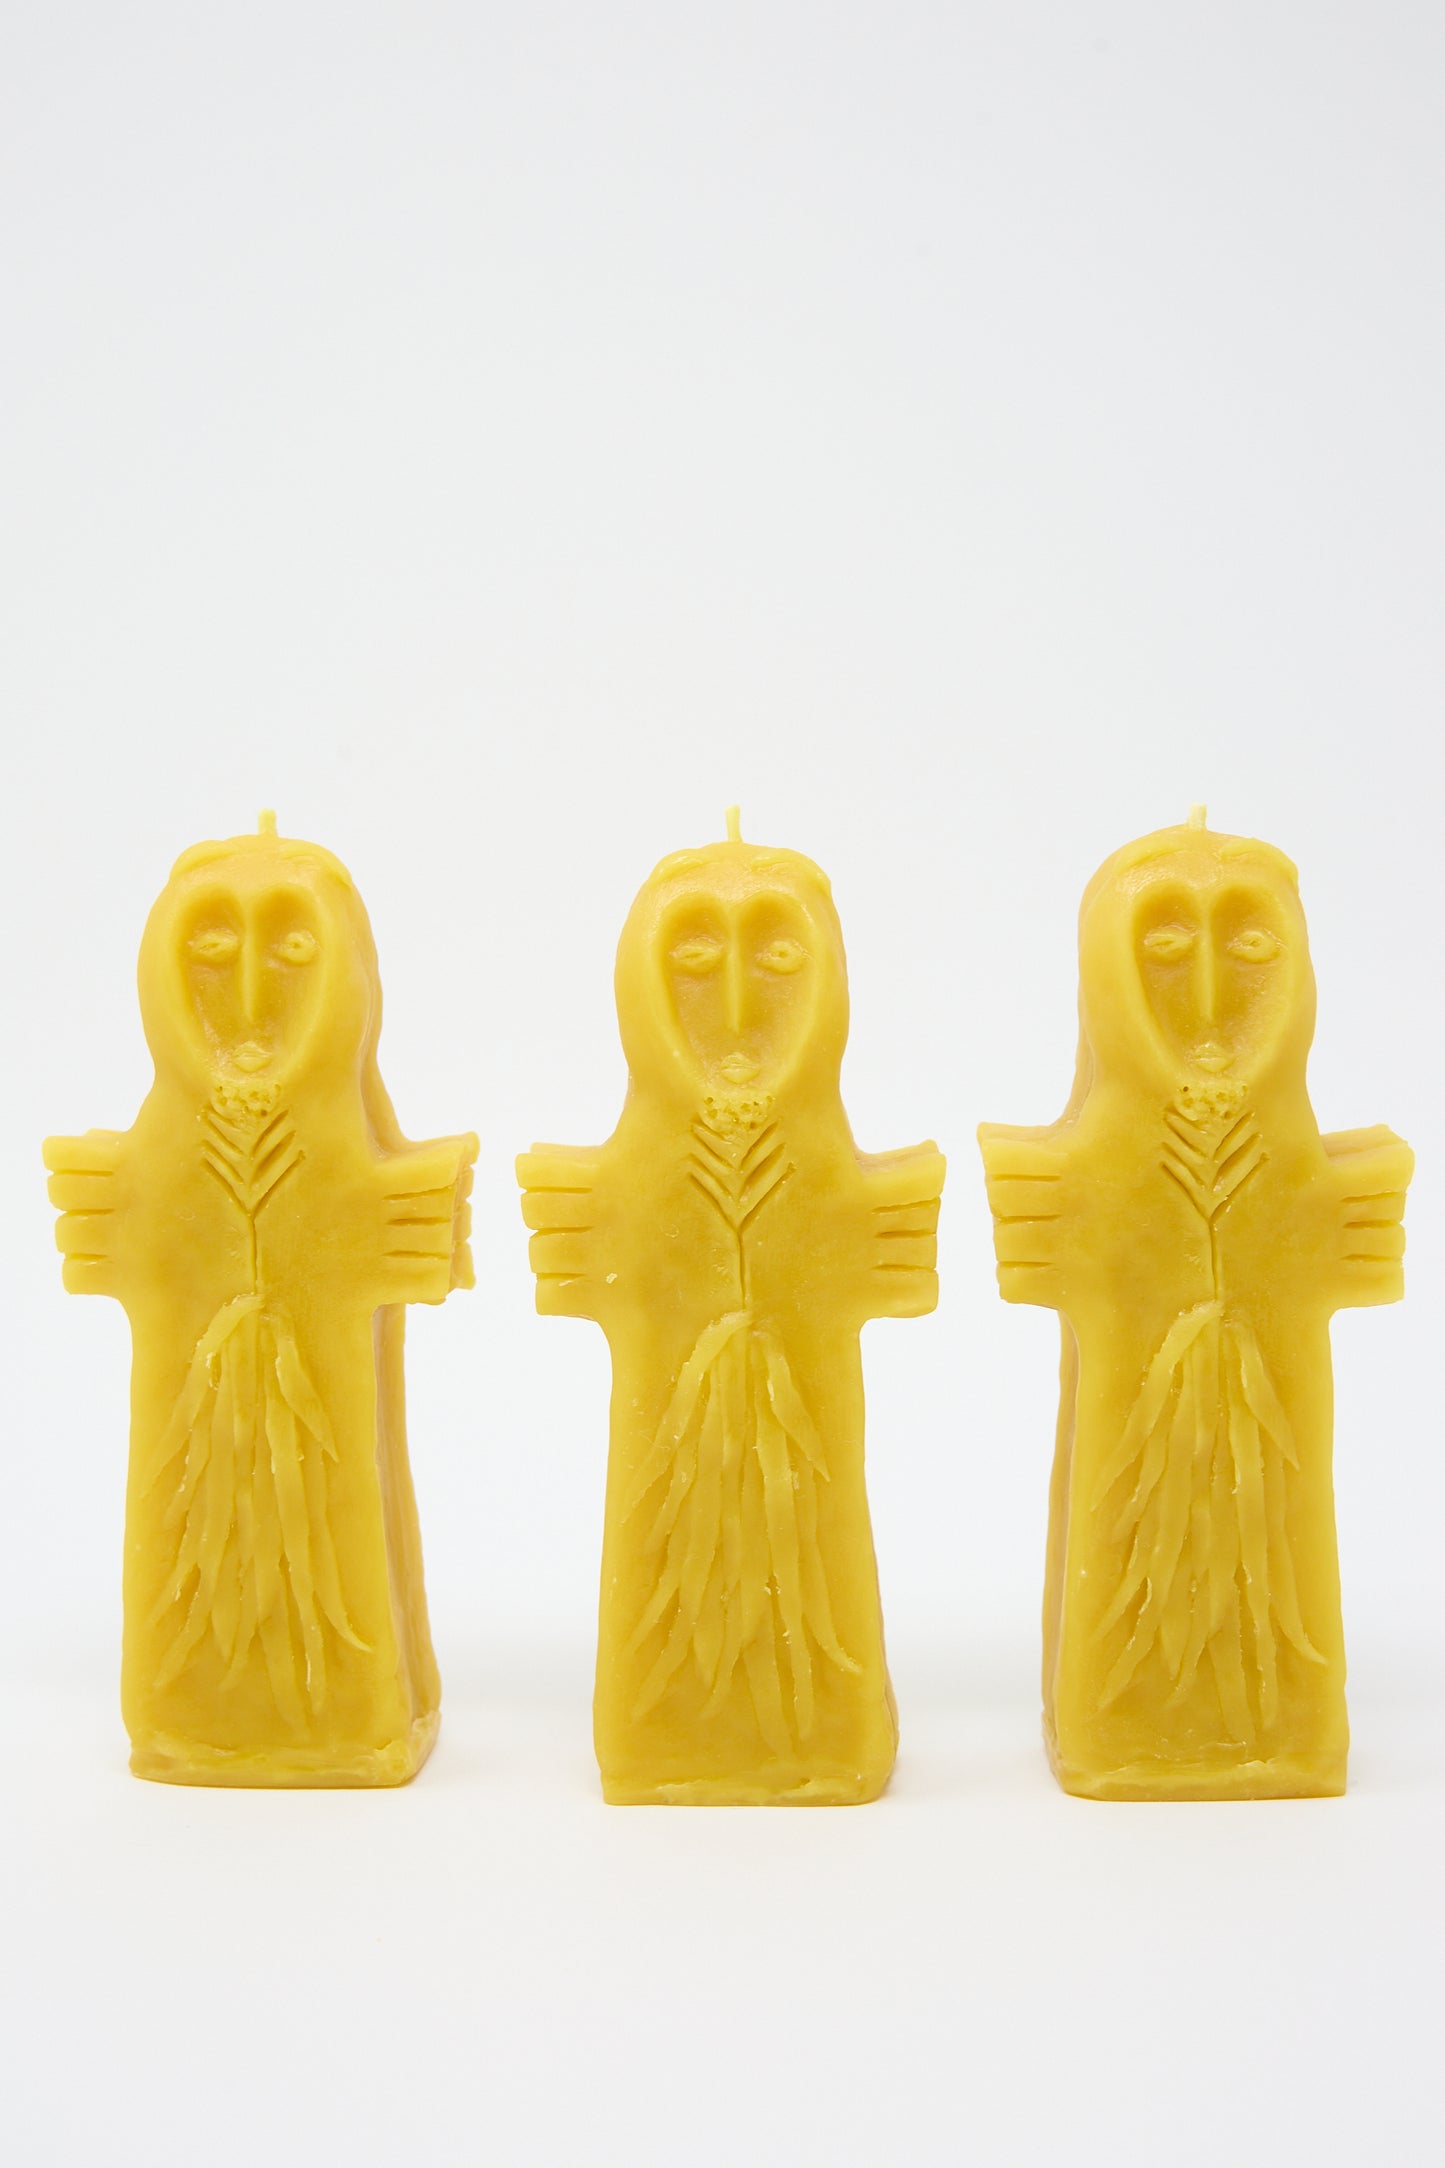 Three yellow Sky Goddess Candles from Rinn to Hitsuji, shaped like robed figures with serene expressions, standing upright against a white background.